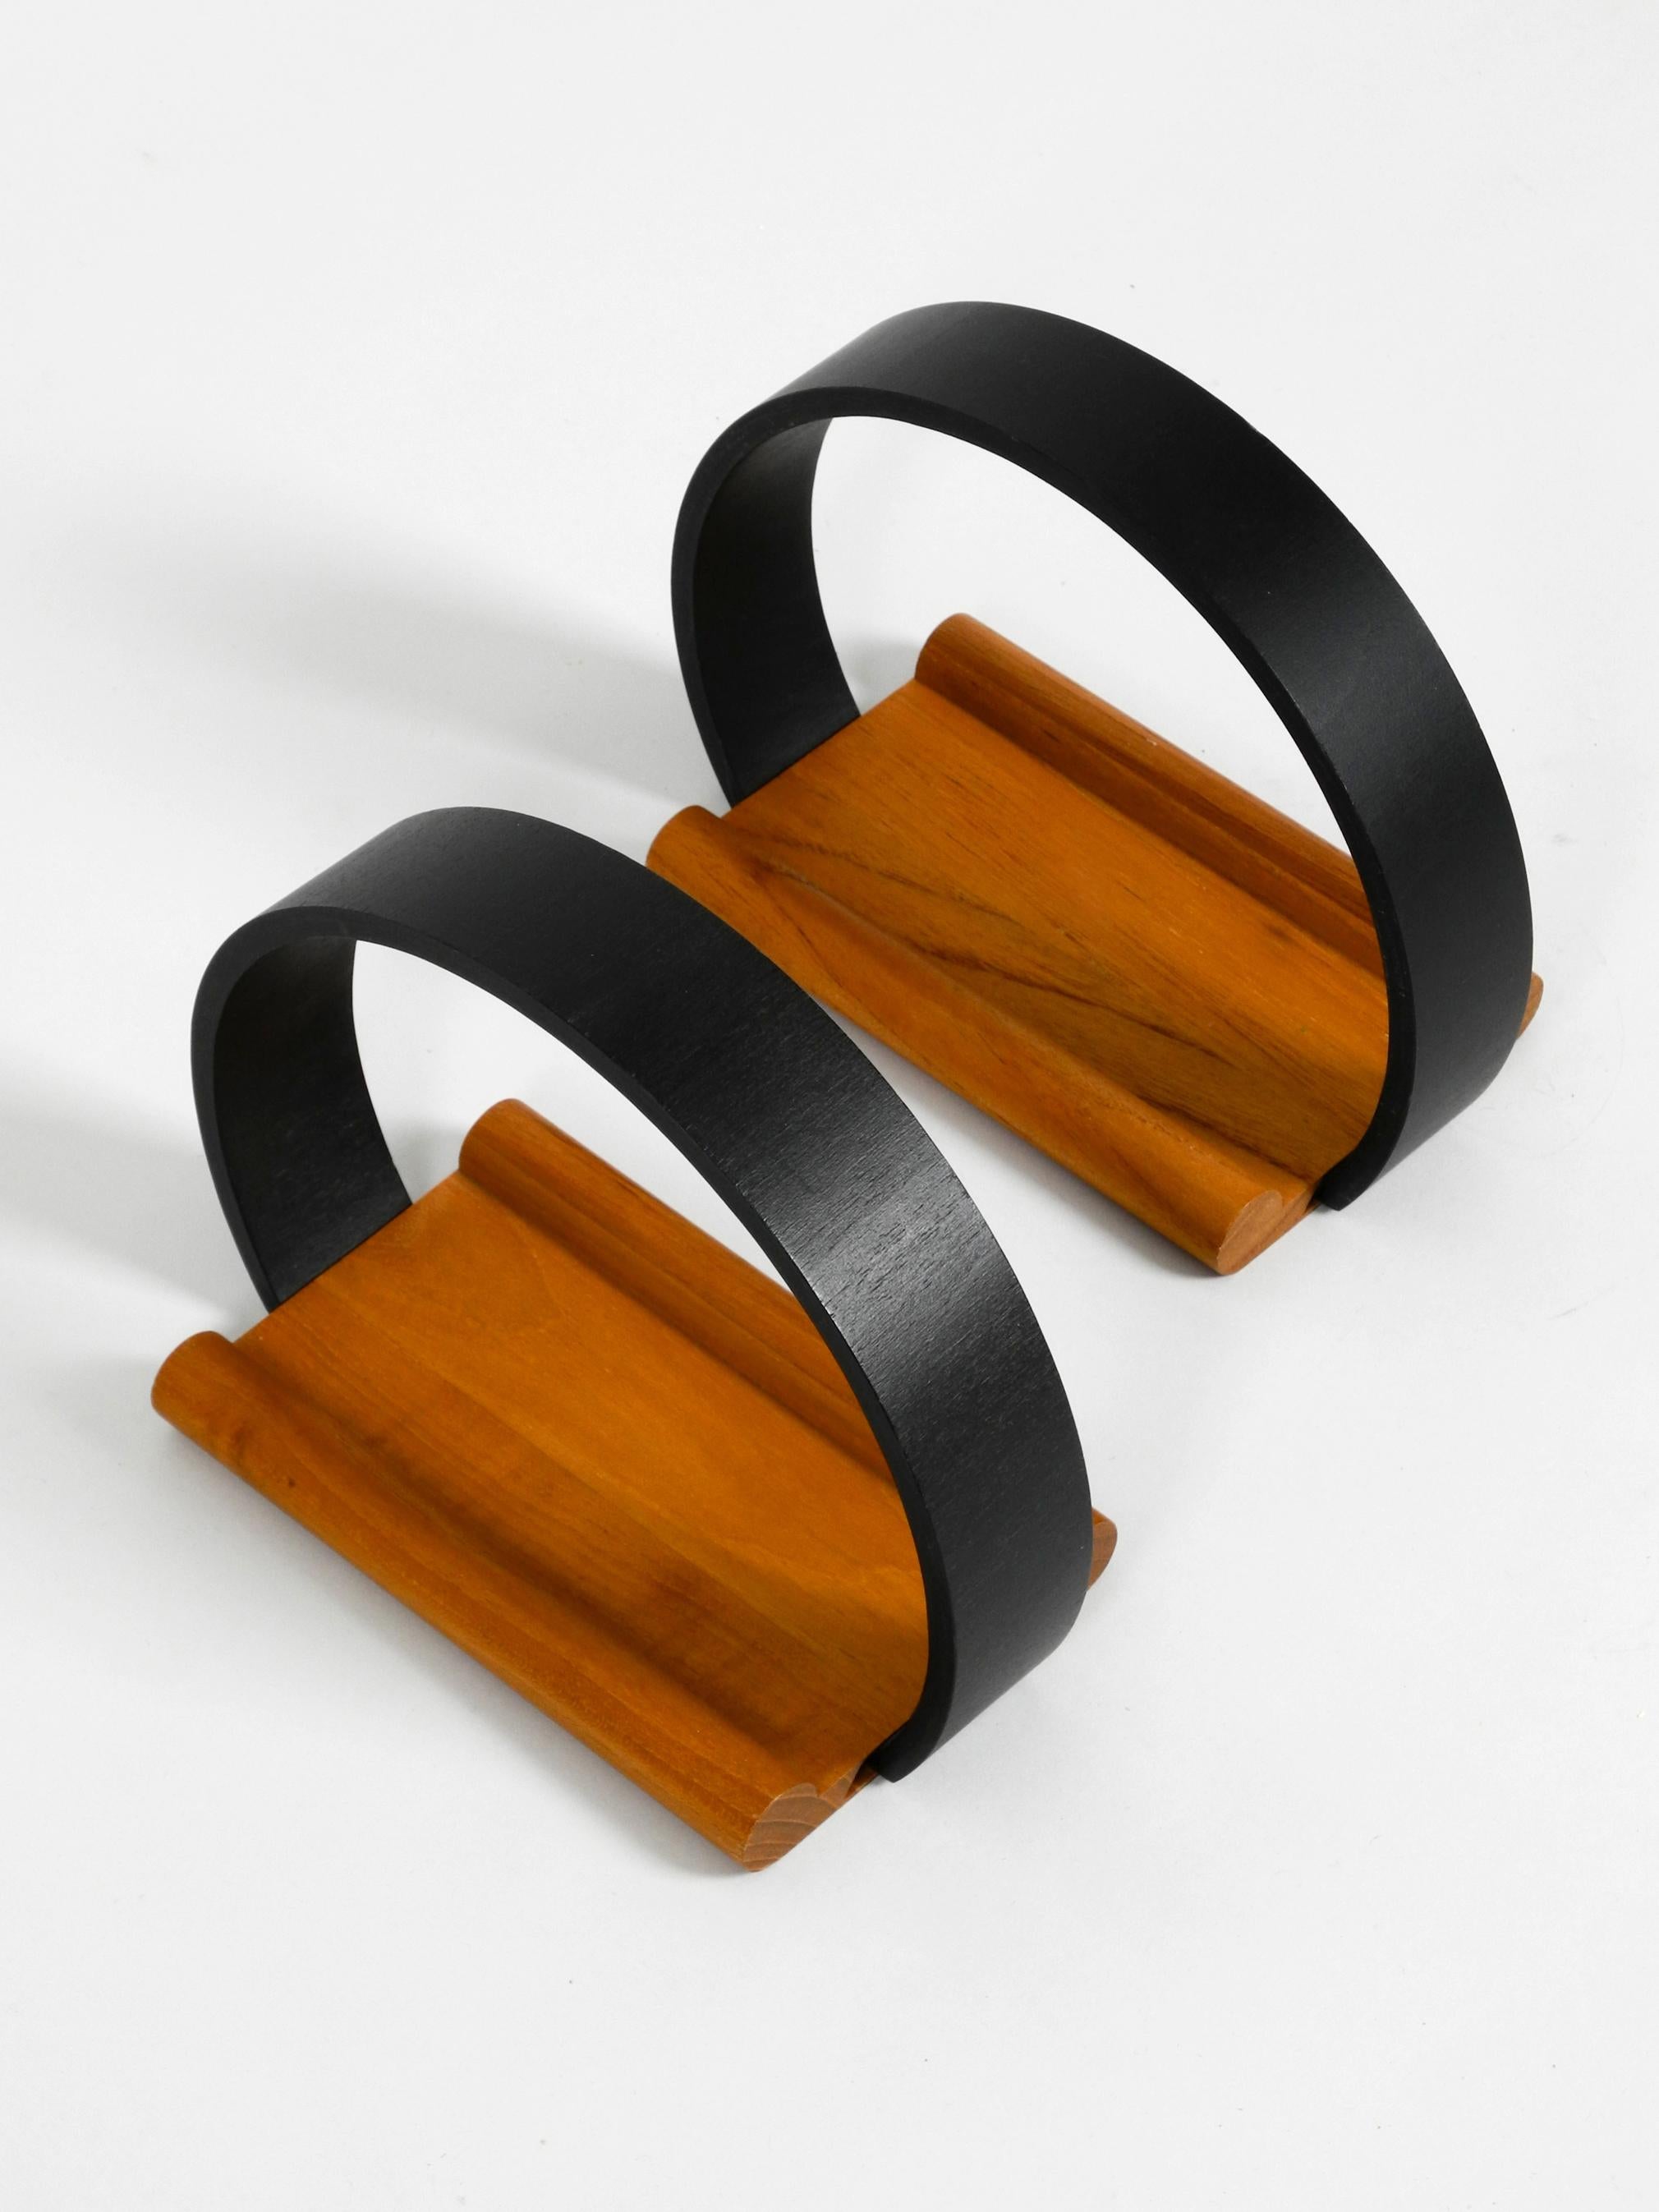 Mid-20th Century Beautiful Teak Table Tray for Salt and Pepper by Richard Nissen, 1960s, Denmark